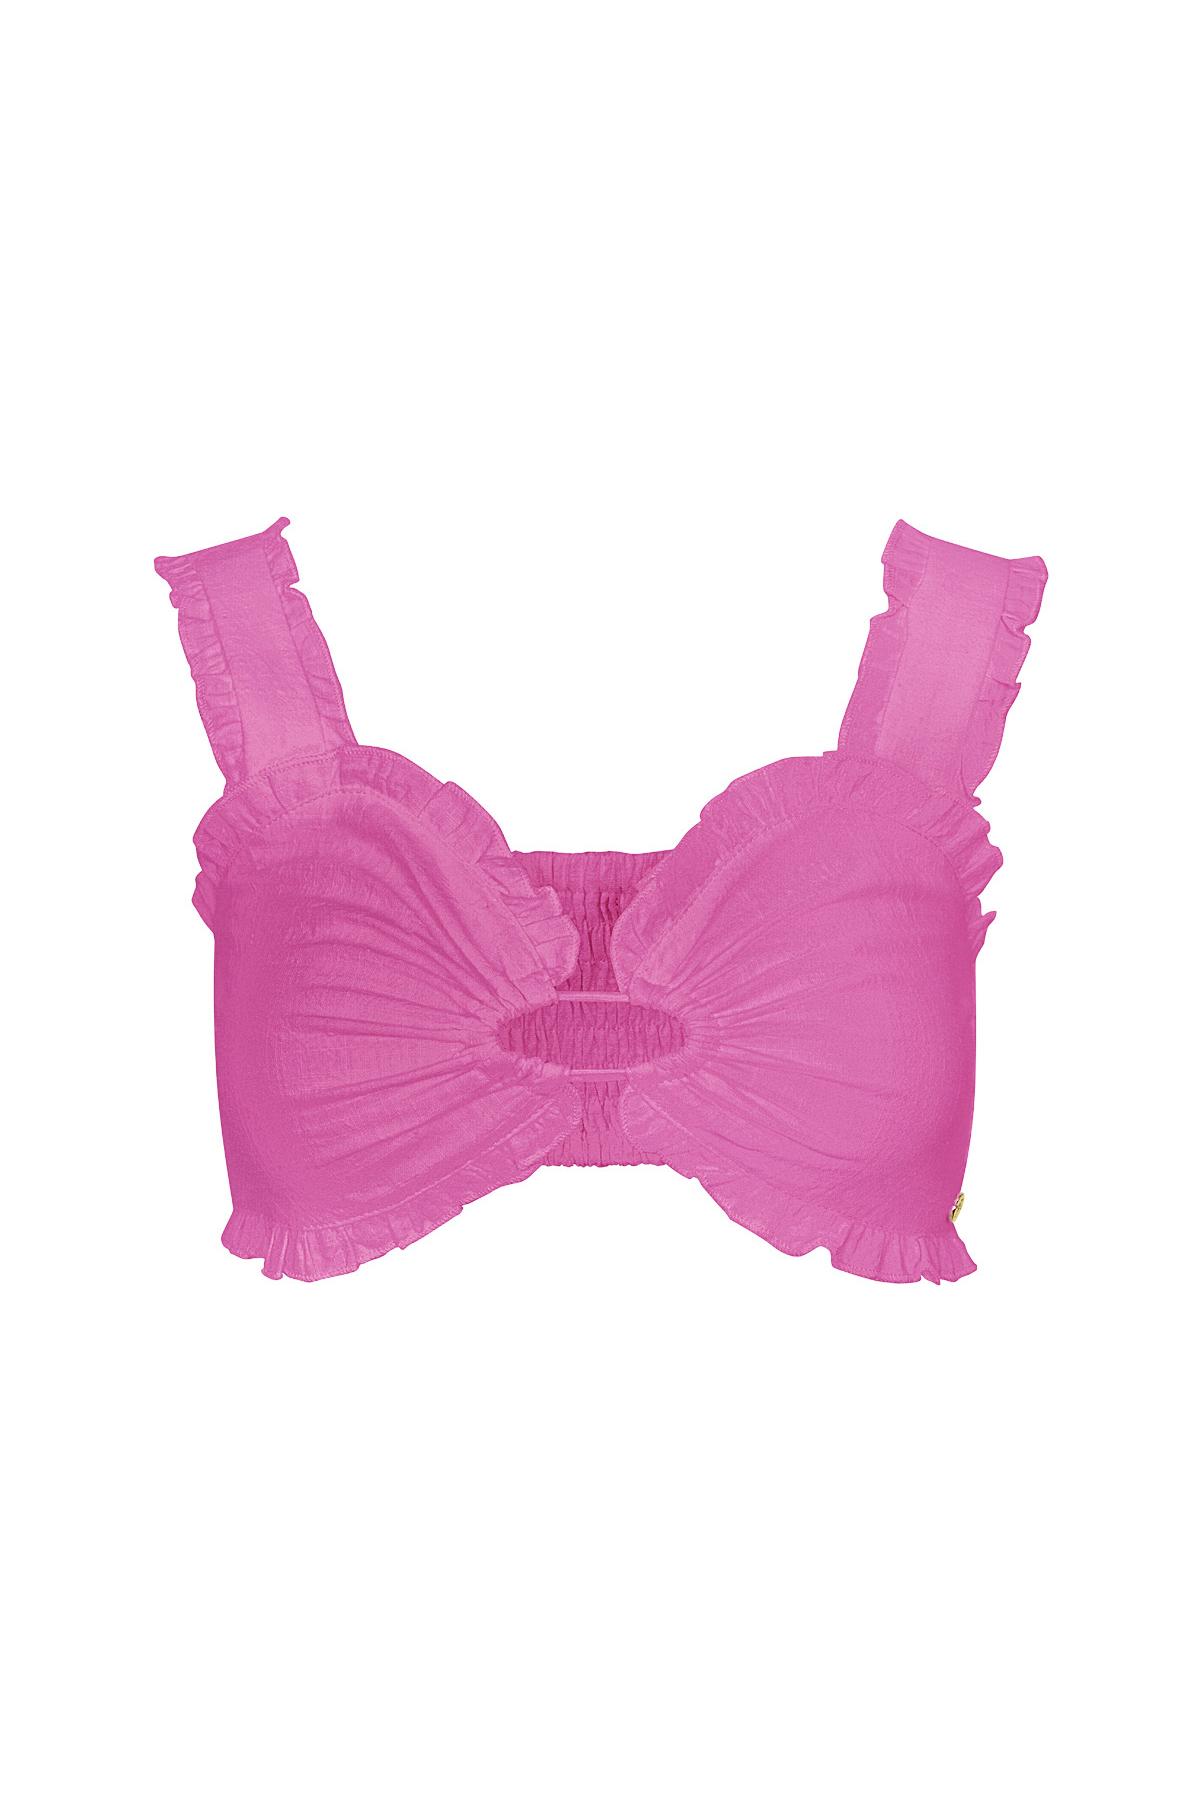 Crop top cut out - pink S h5 